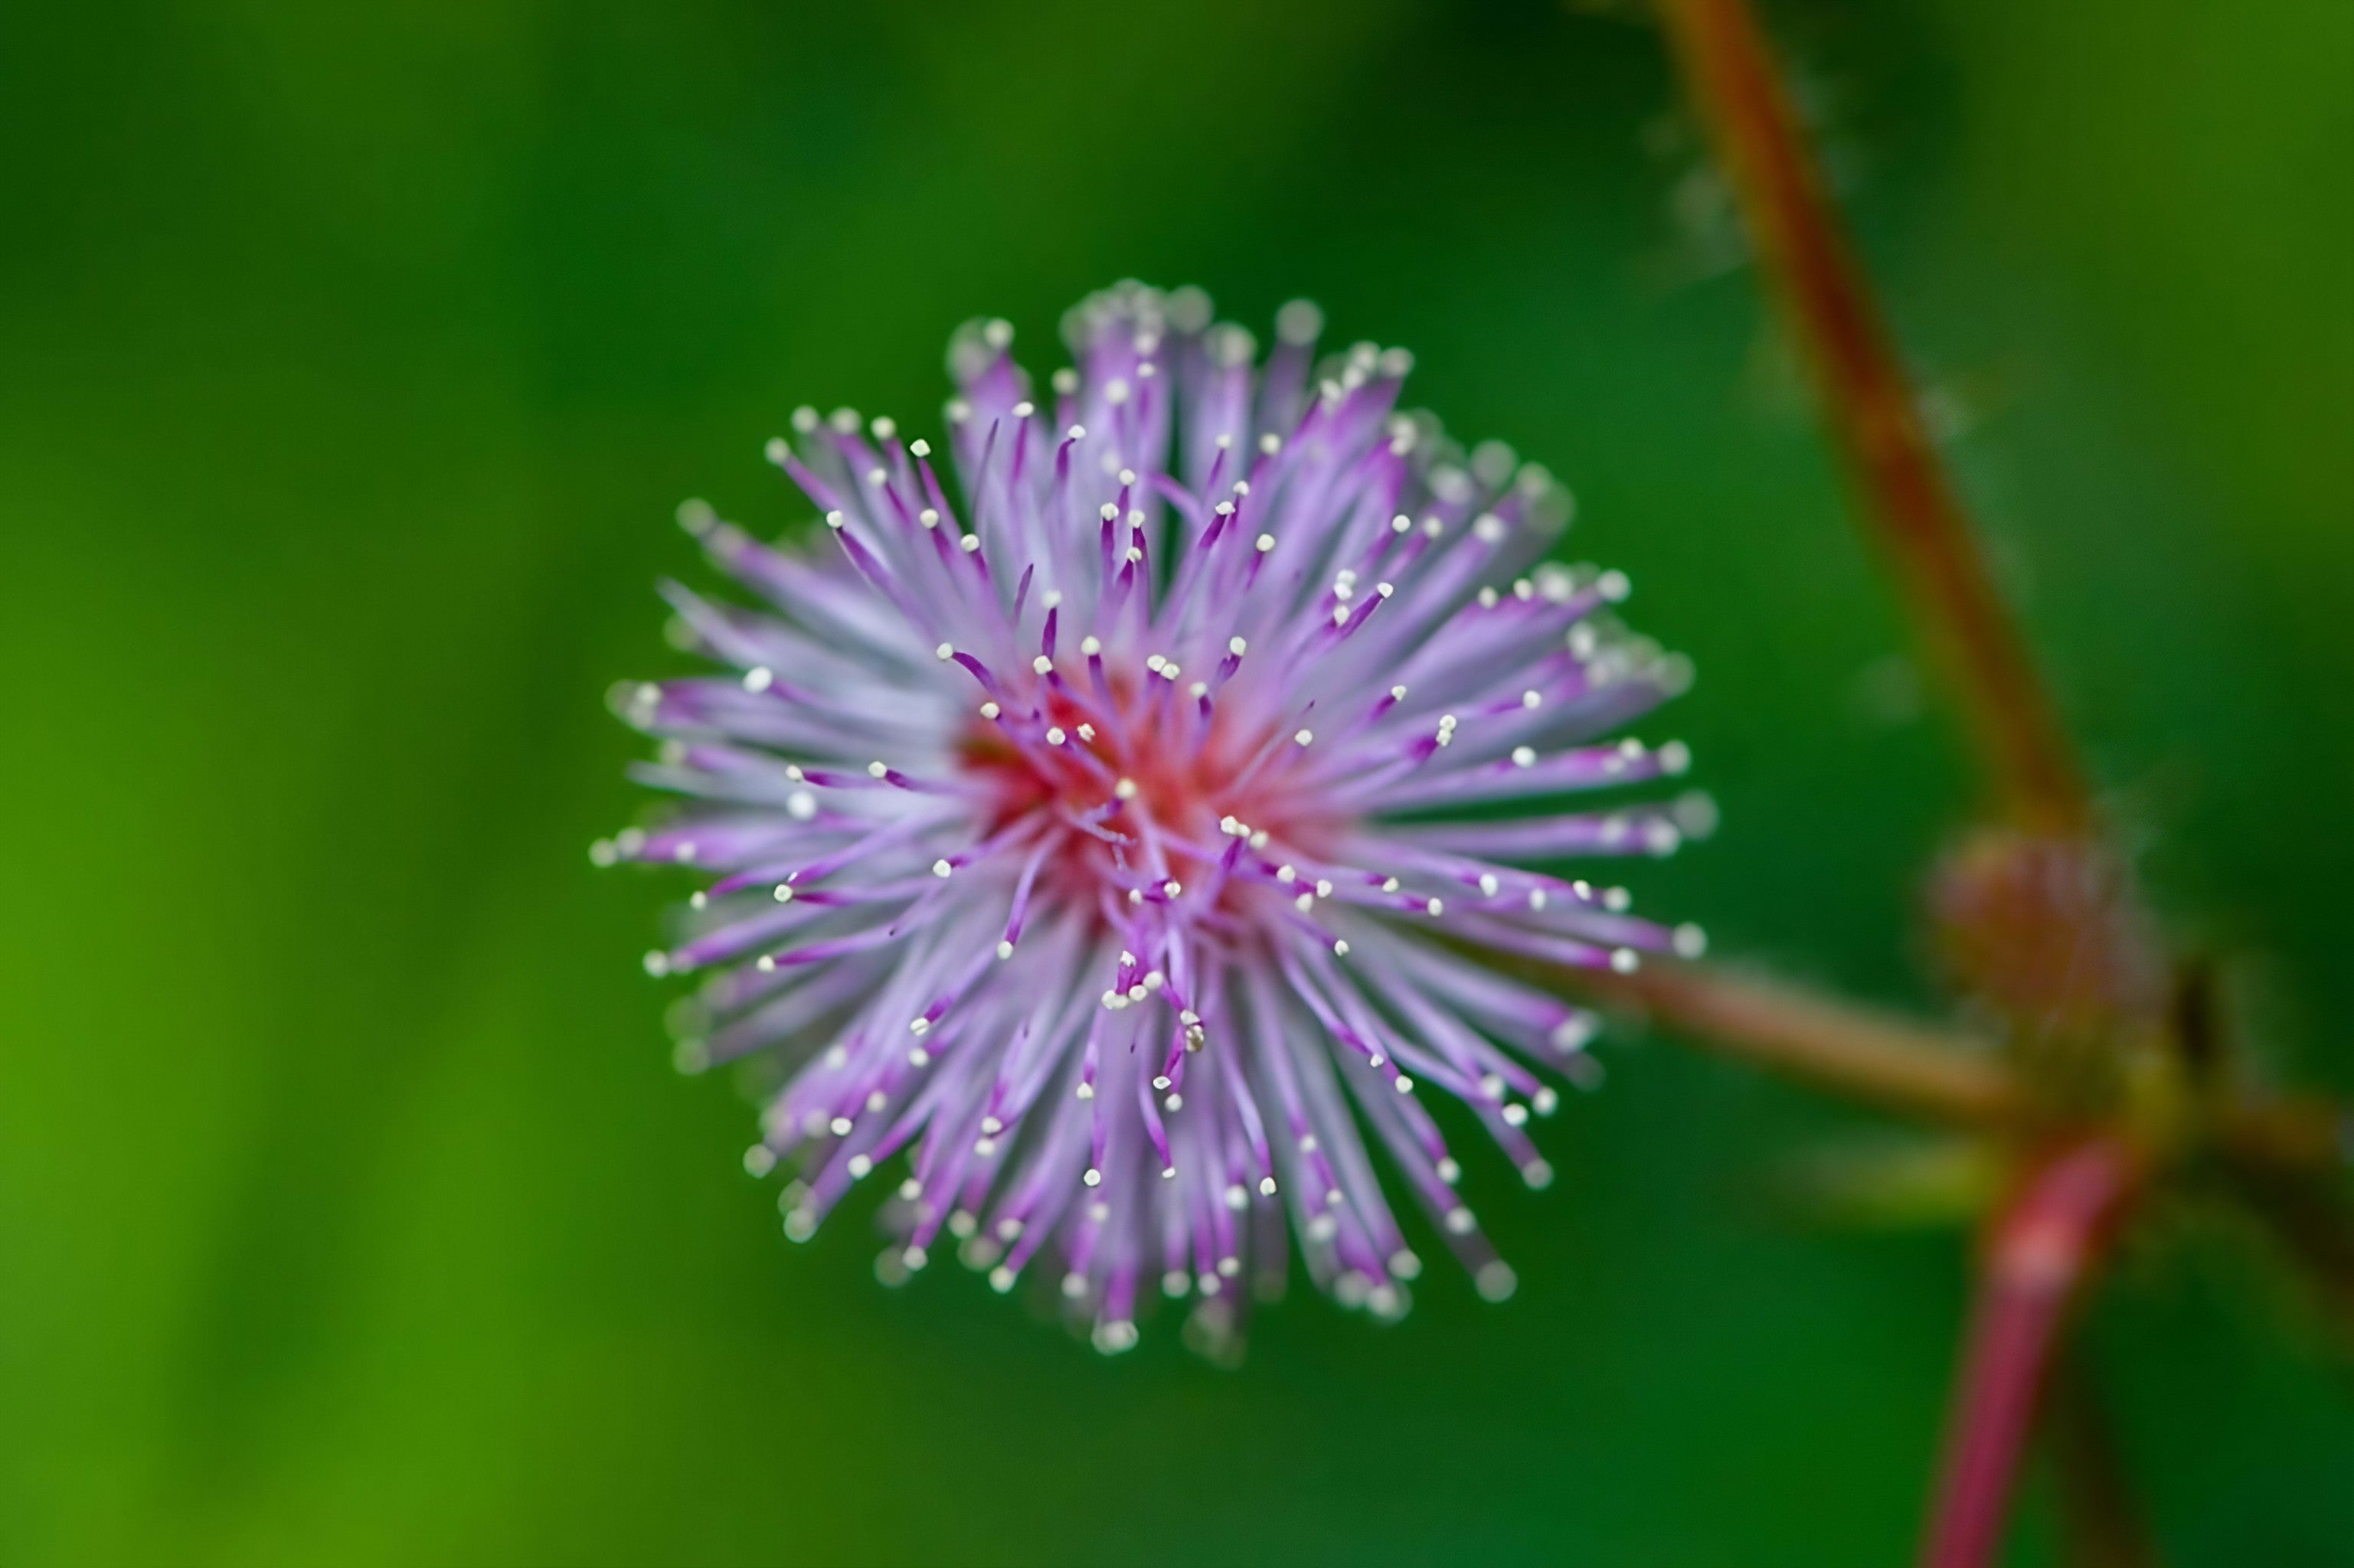 Detailed view of a Mimosa Pudica flower showcasing purple petals with white speckles